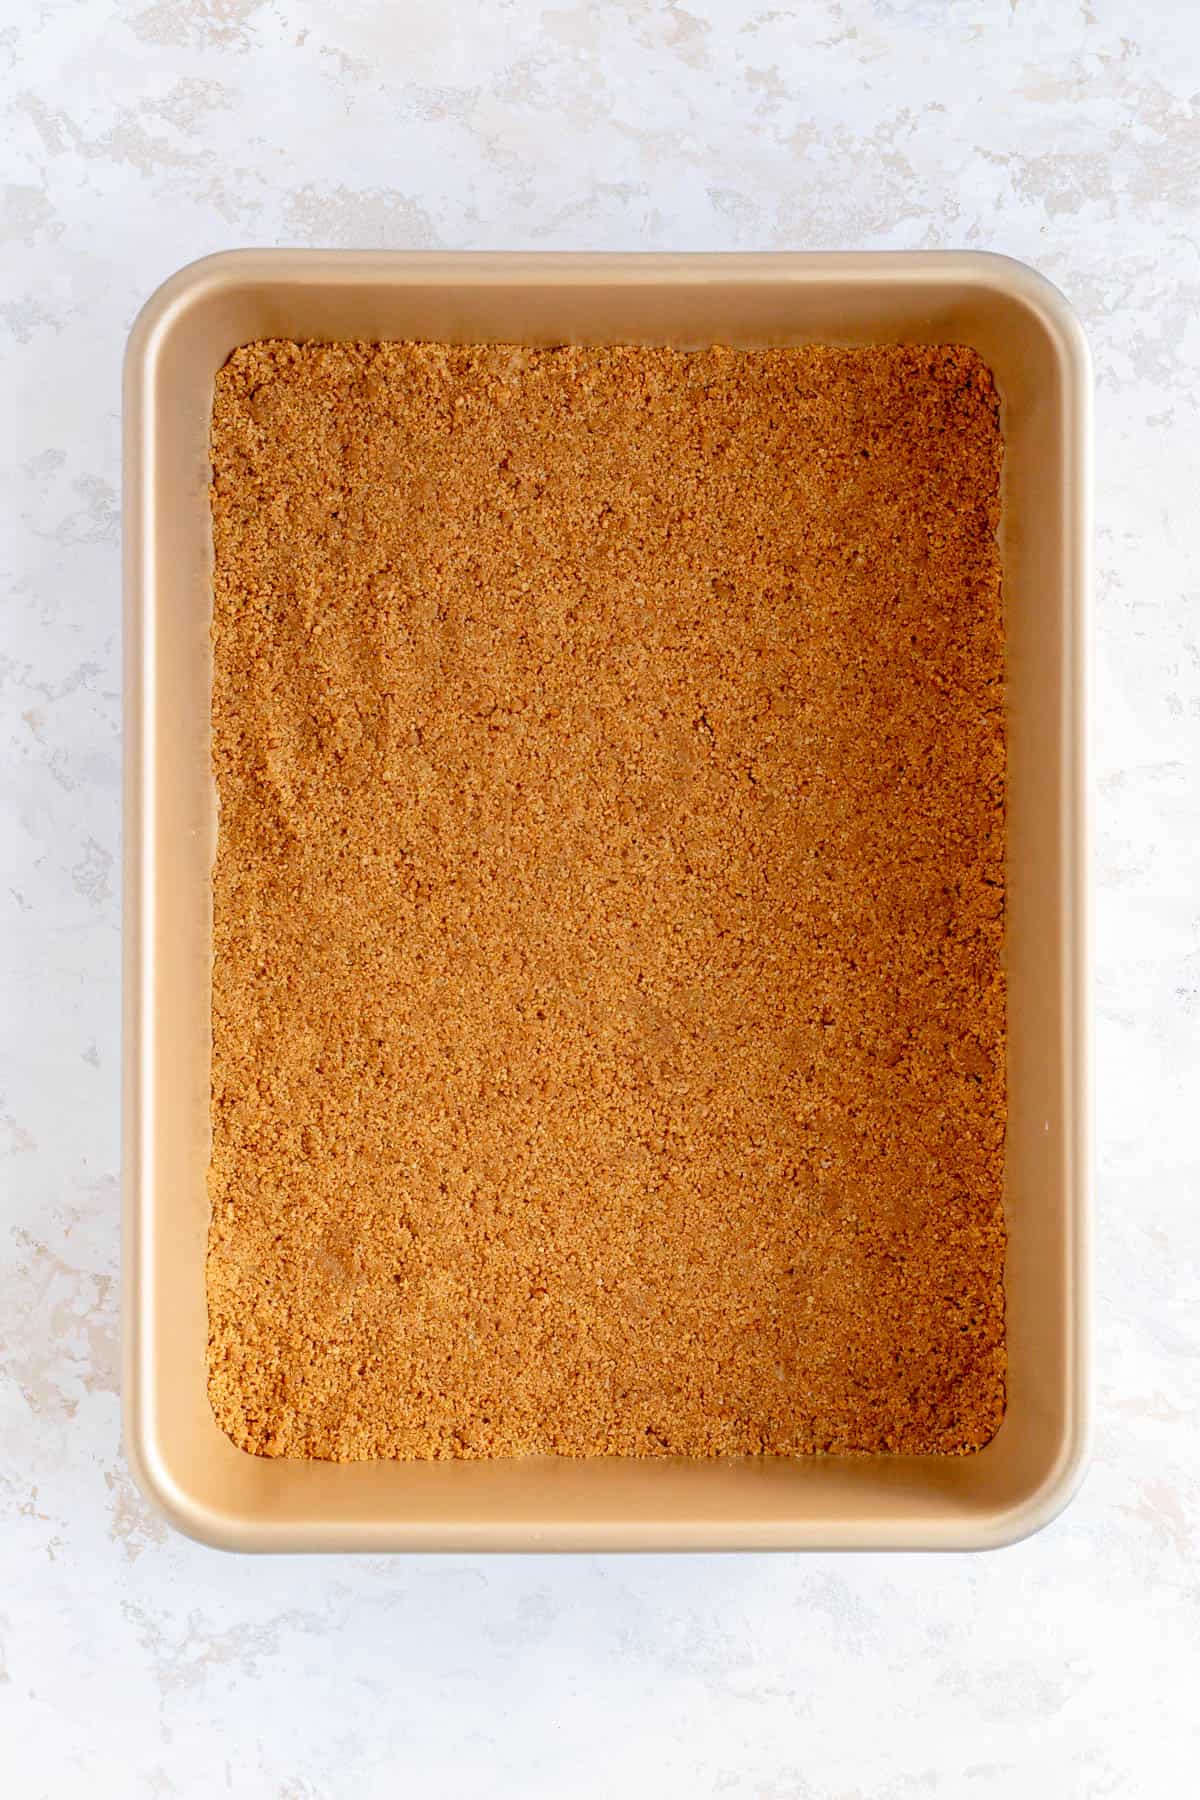 a pressed graham cracker crust in a gold 9 x 13 pan